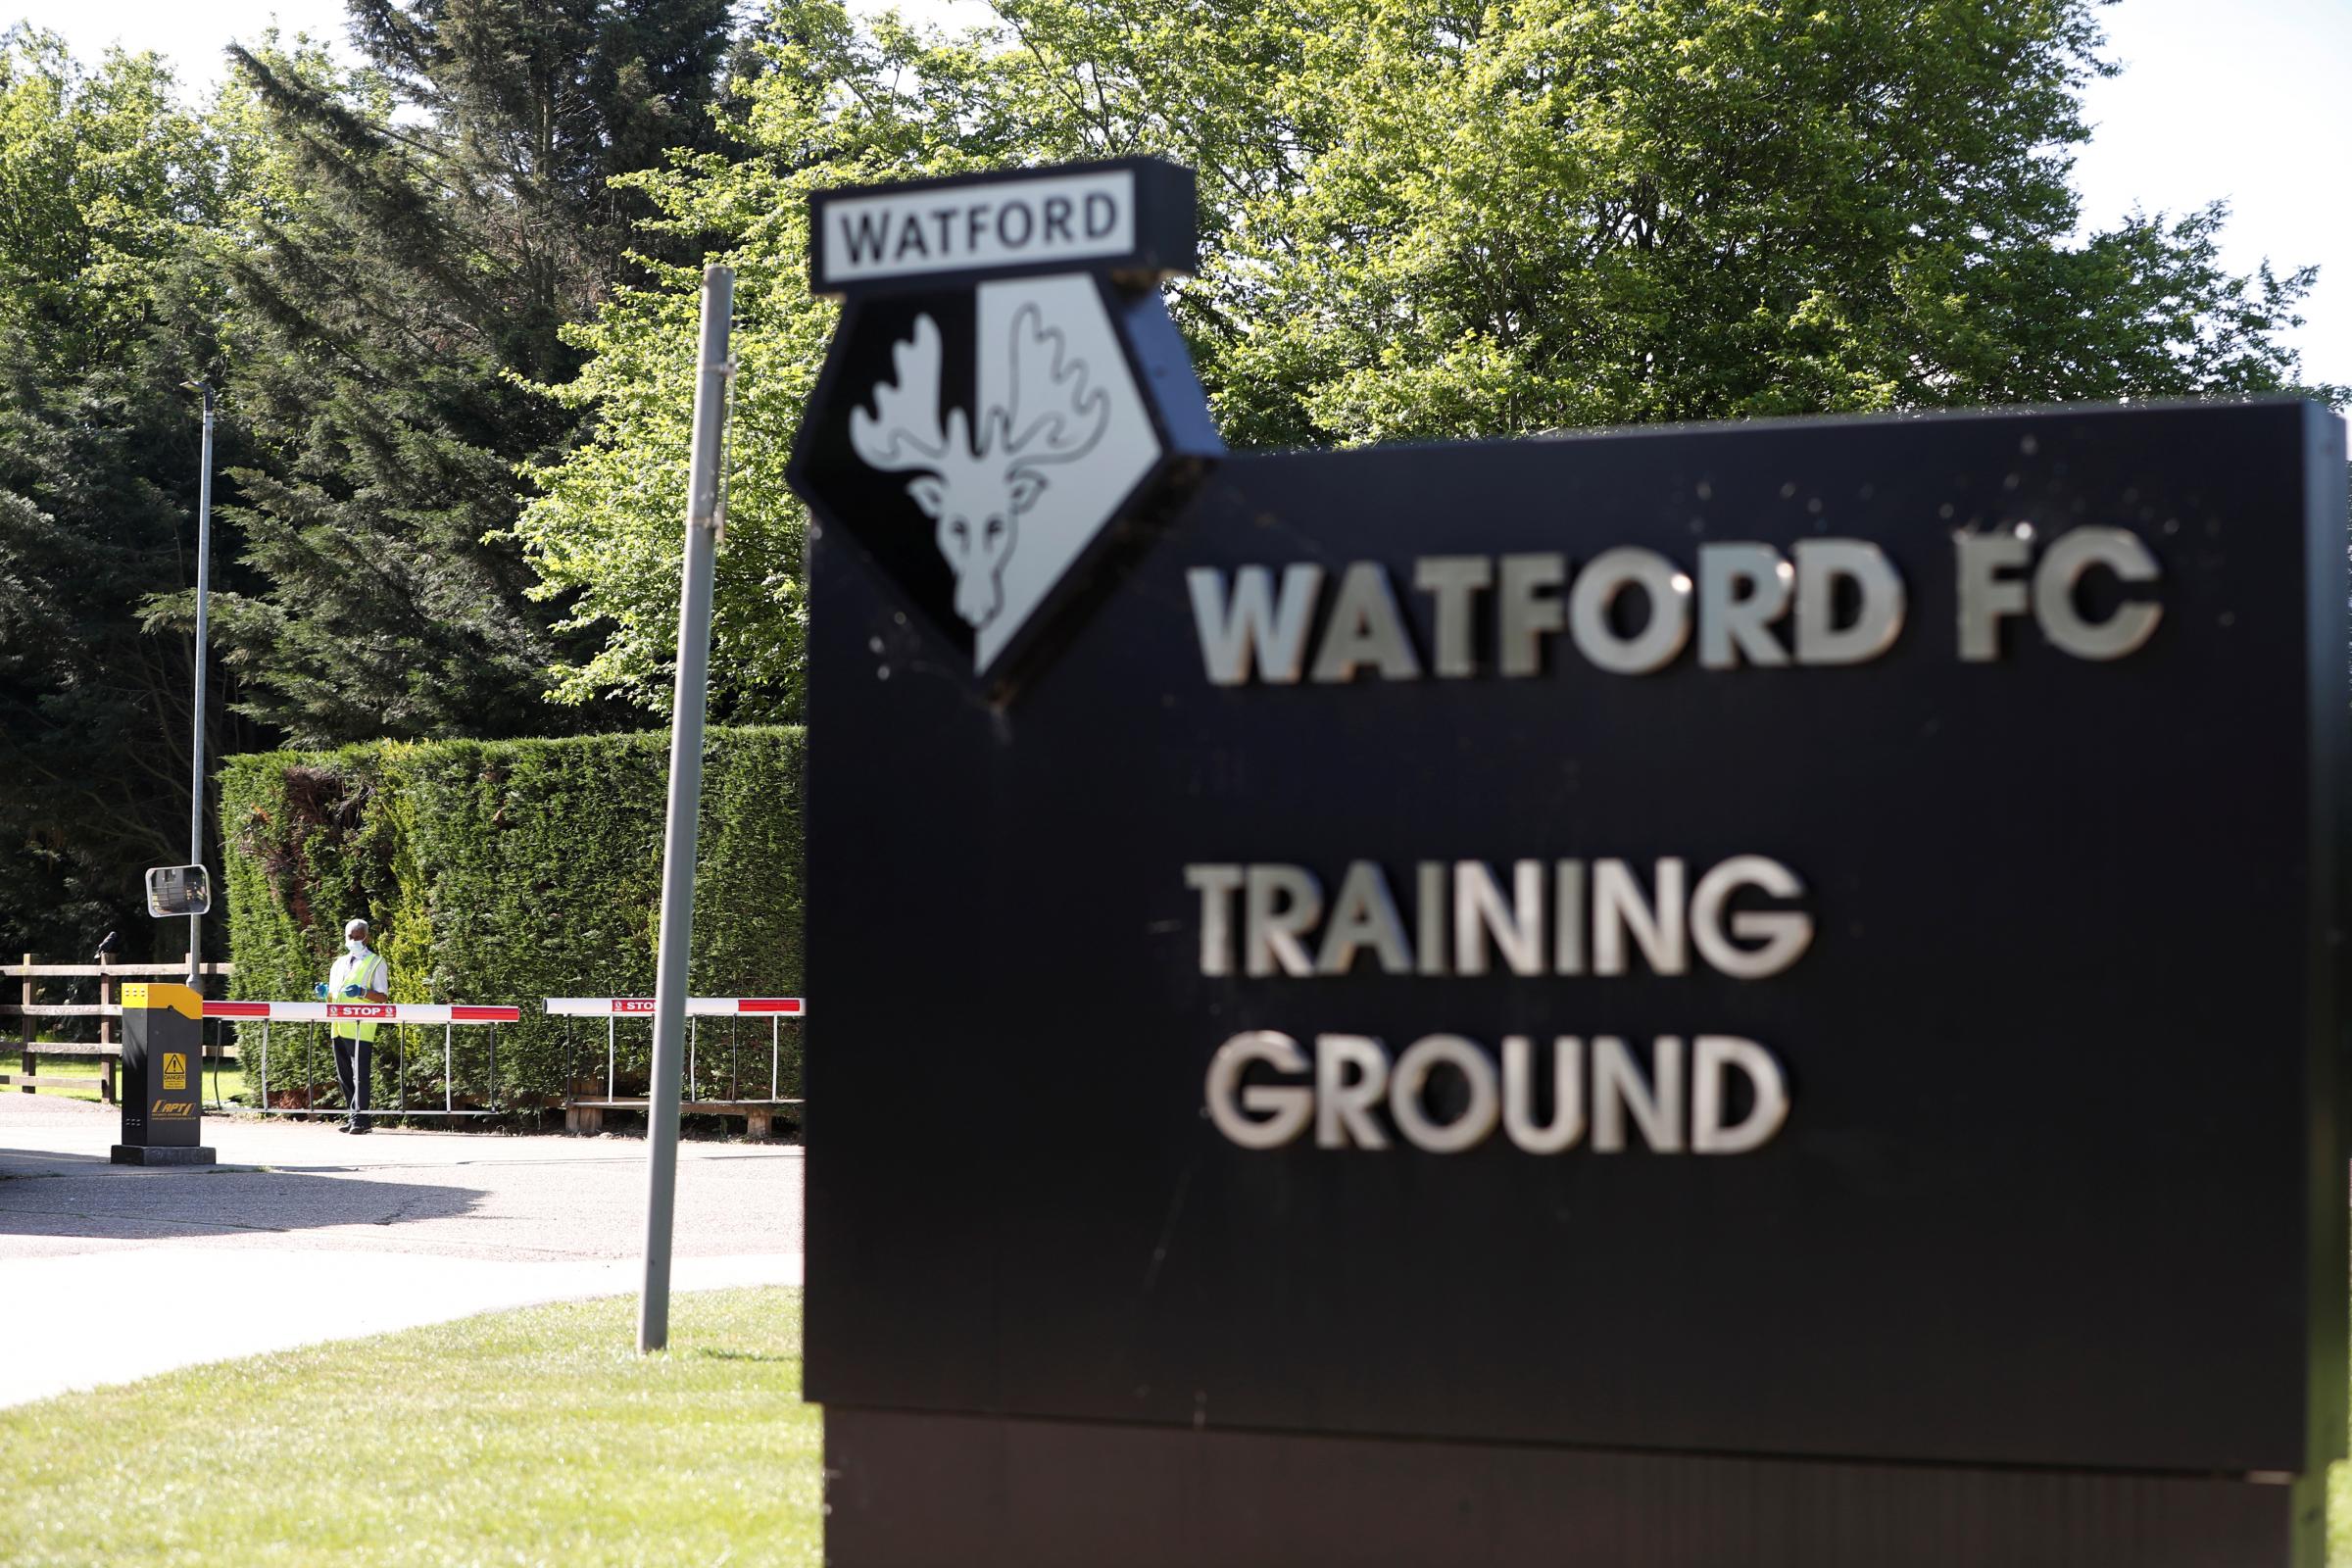 Watford's training ground gives players best chance of success